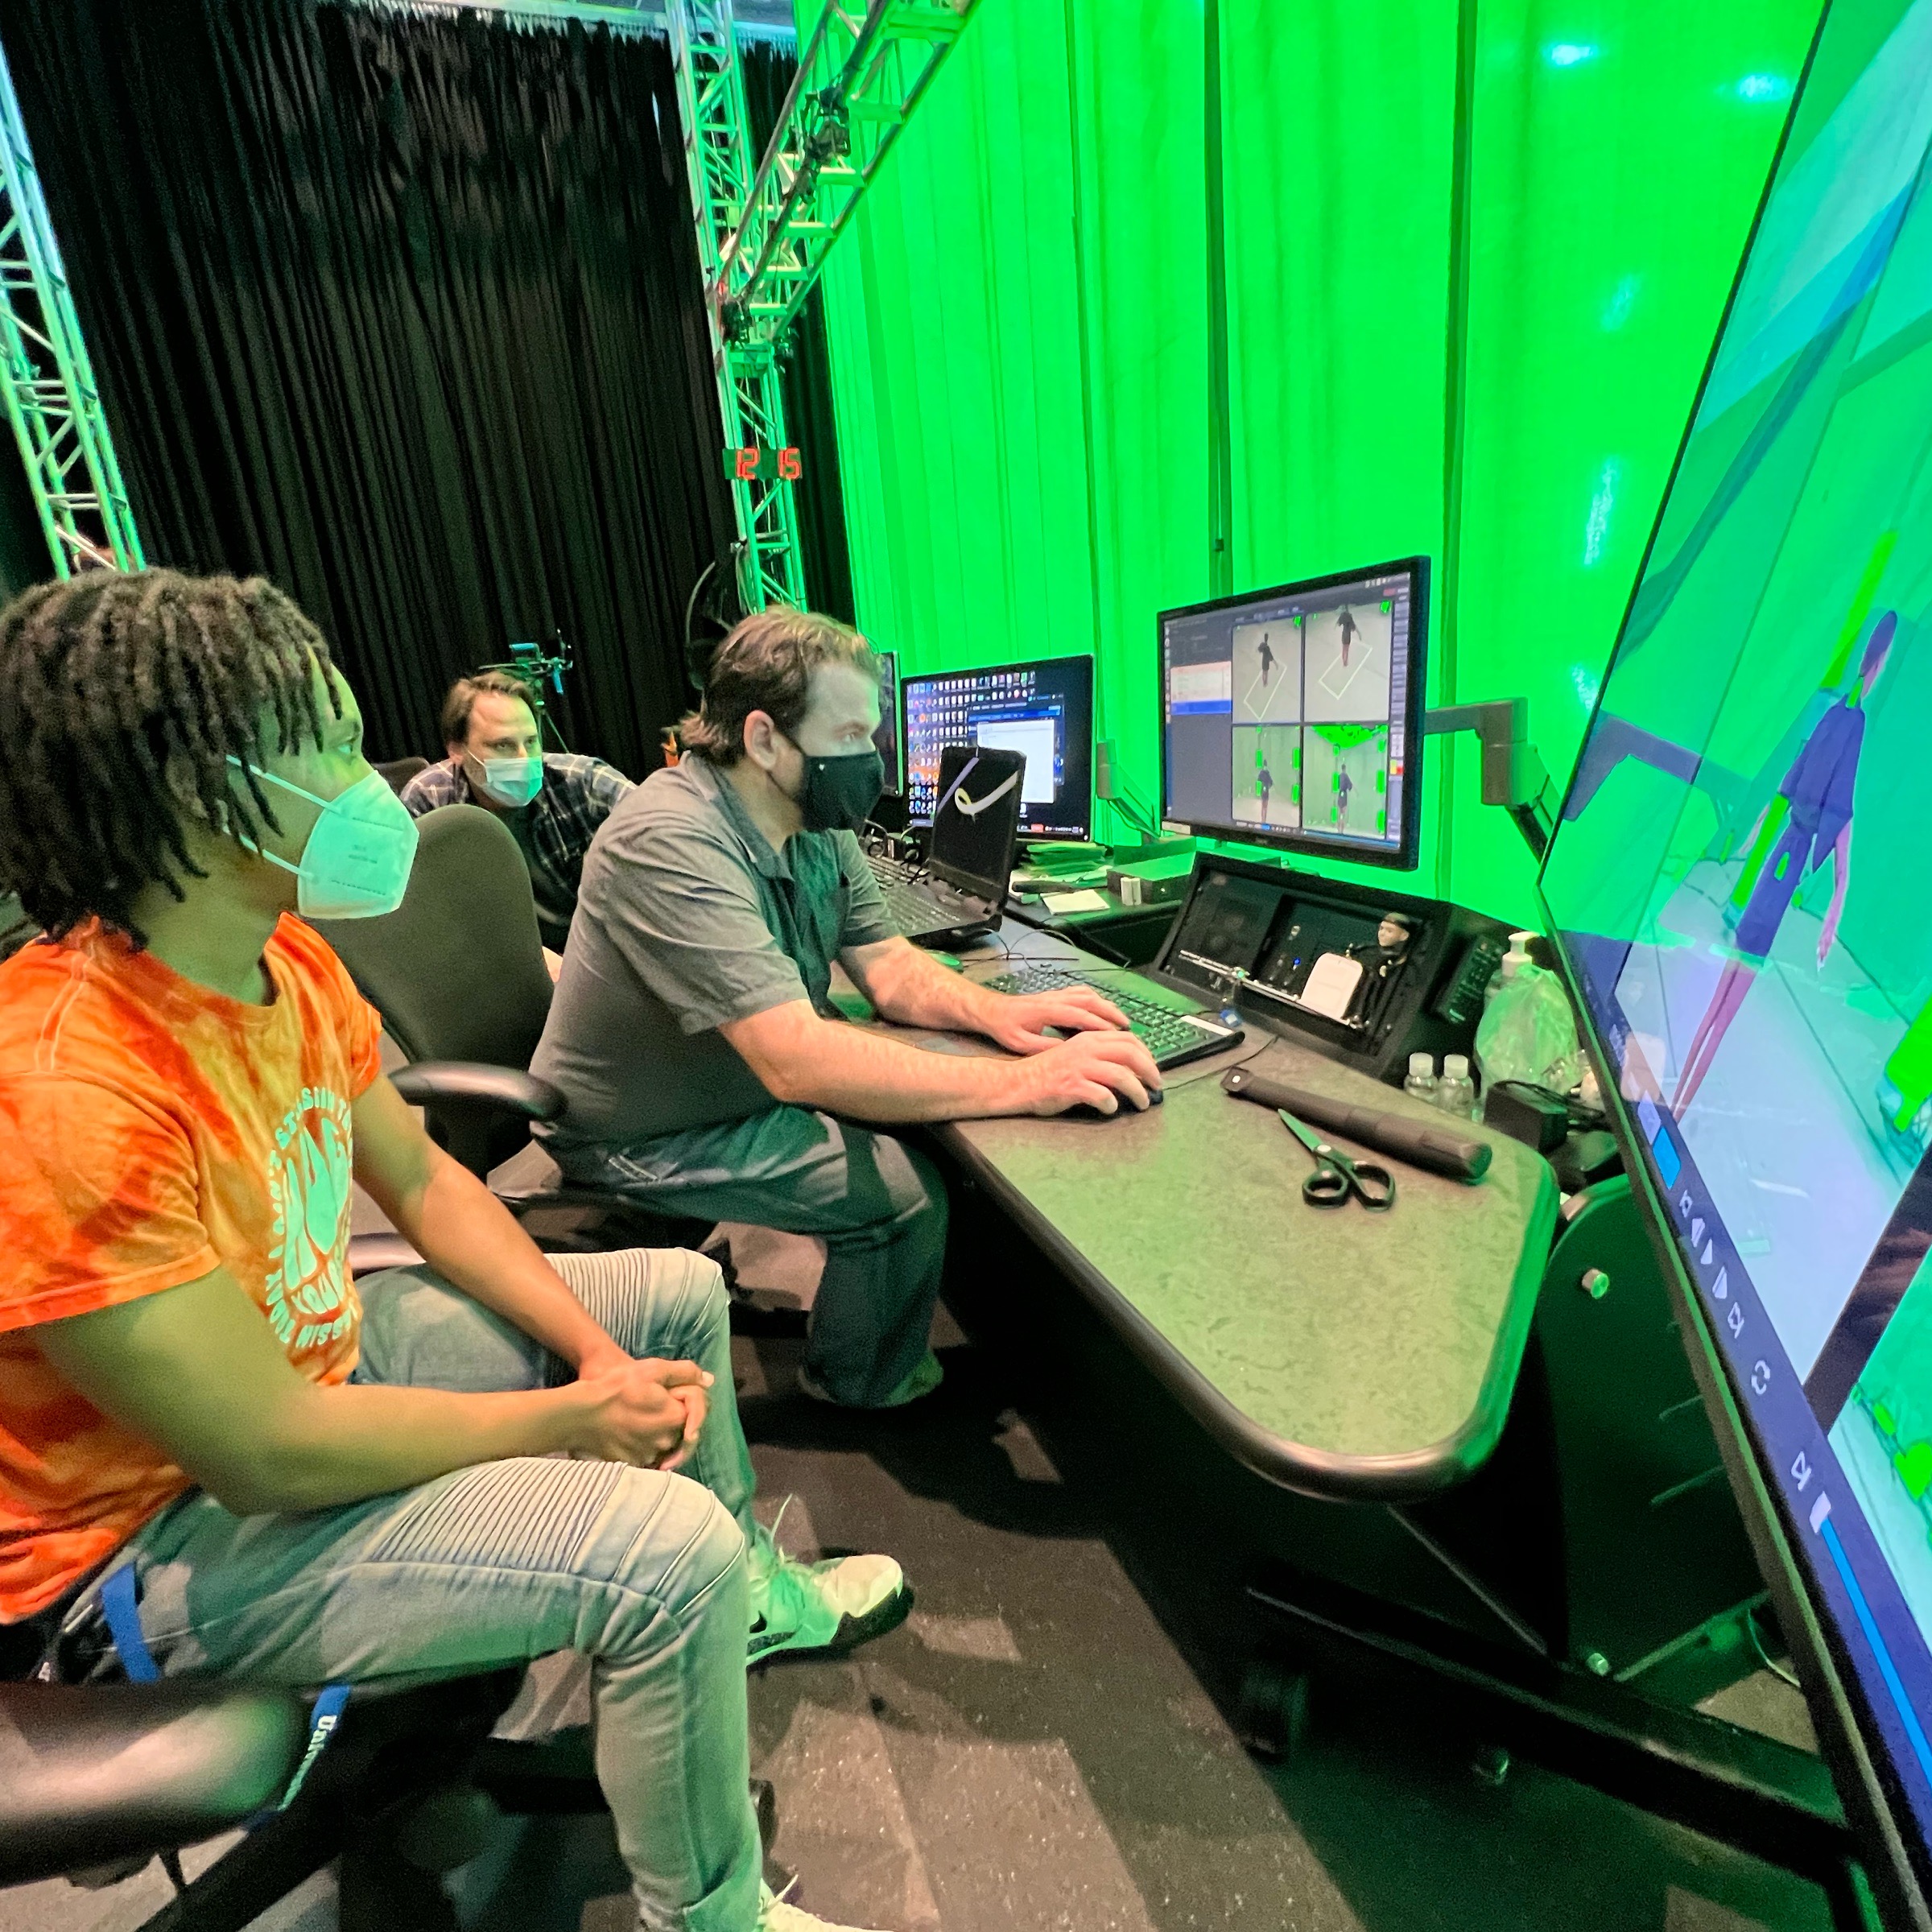 Wild Capture, in partnership with Creative Media Industries Institute in Atlanta, provides spatial media and production services to bring quality volumetric activations and digital humans to market.